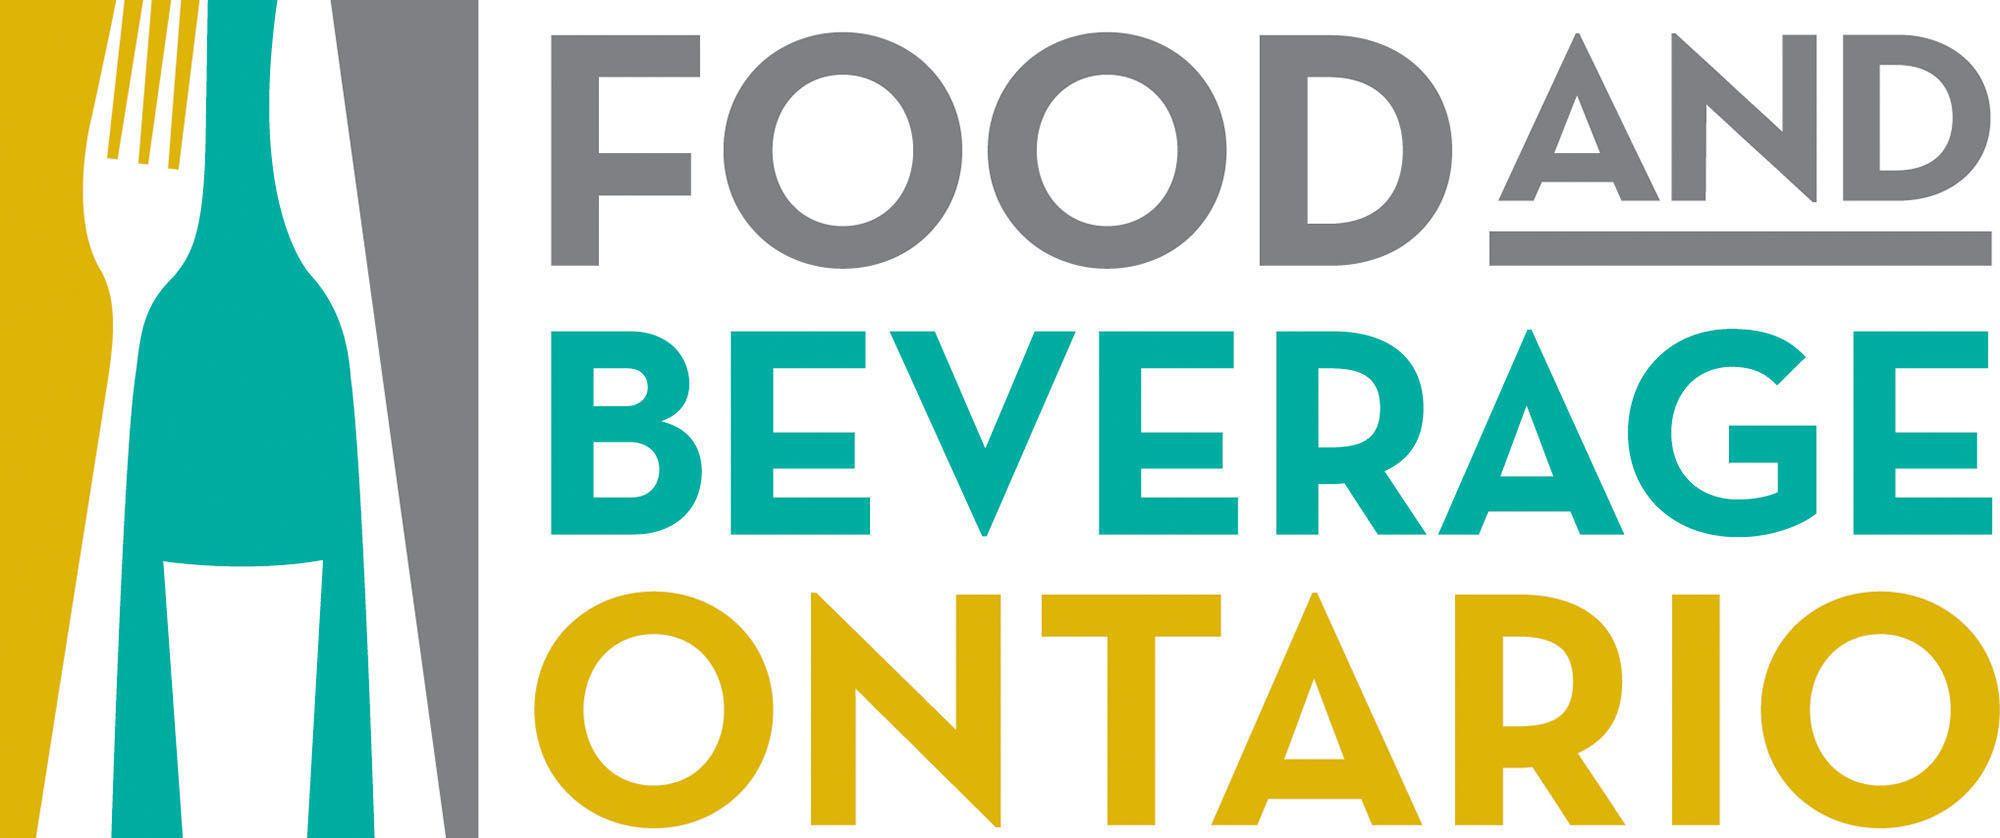 Food and Beverage Company Logo - CNW. Food and beverage processors unveil fresh logo, exciting new